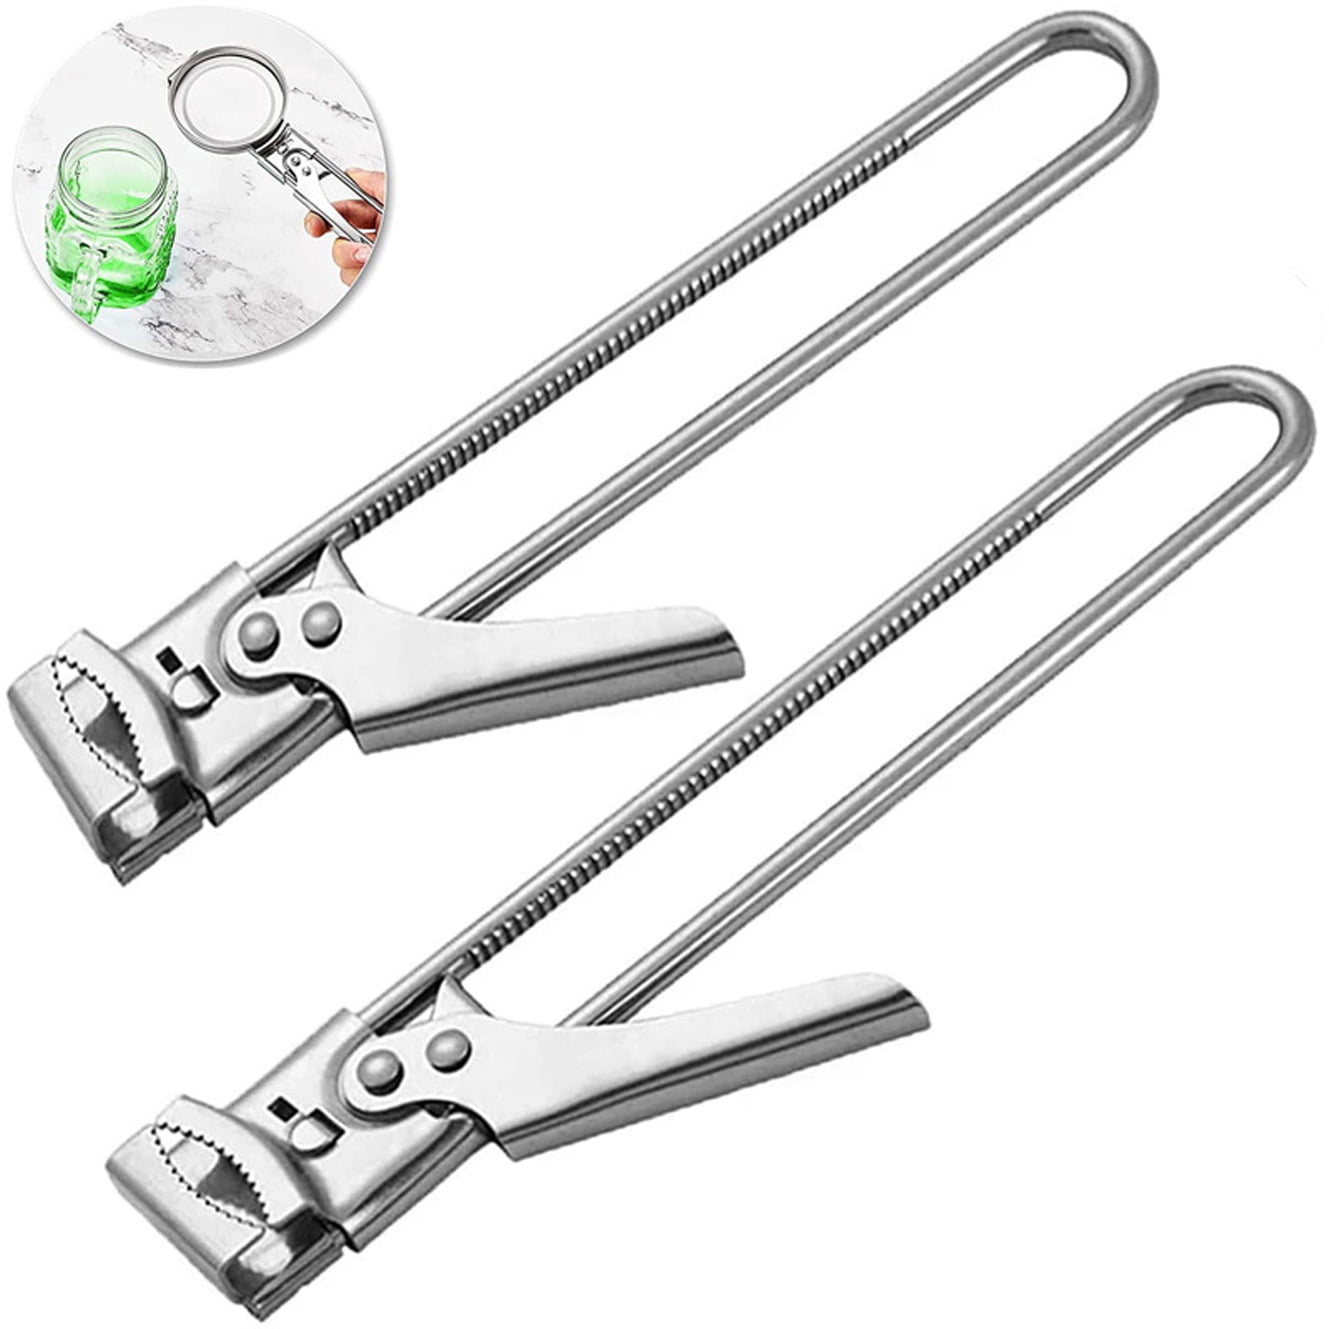 Details about   2pcs Pruner Replacement Springs Stainless Steel Spring For Gardening ScissorsKB 